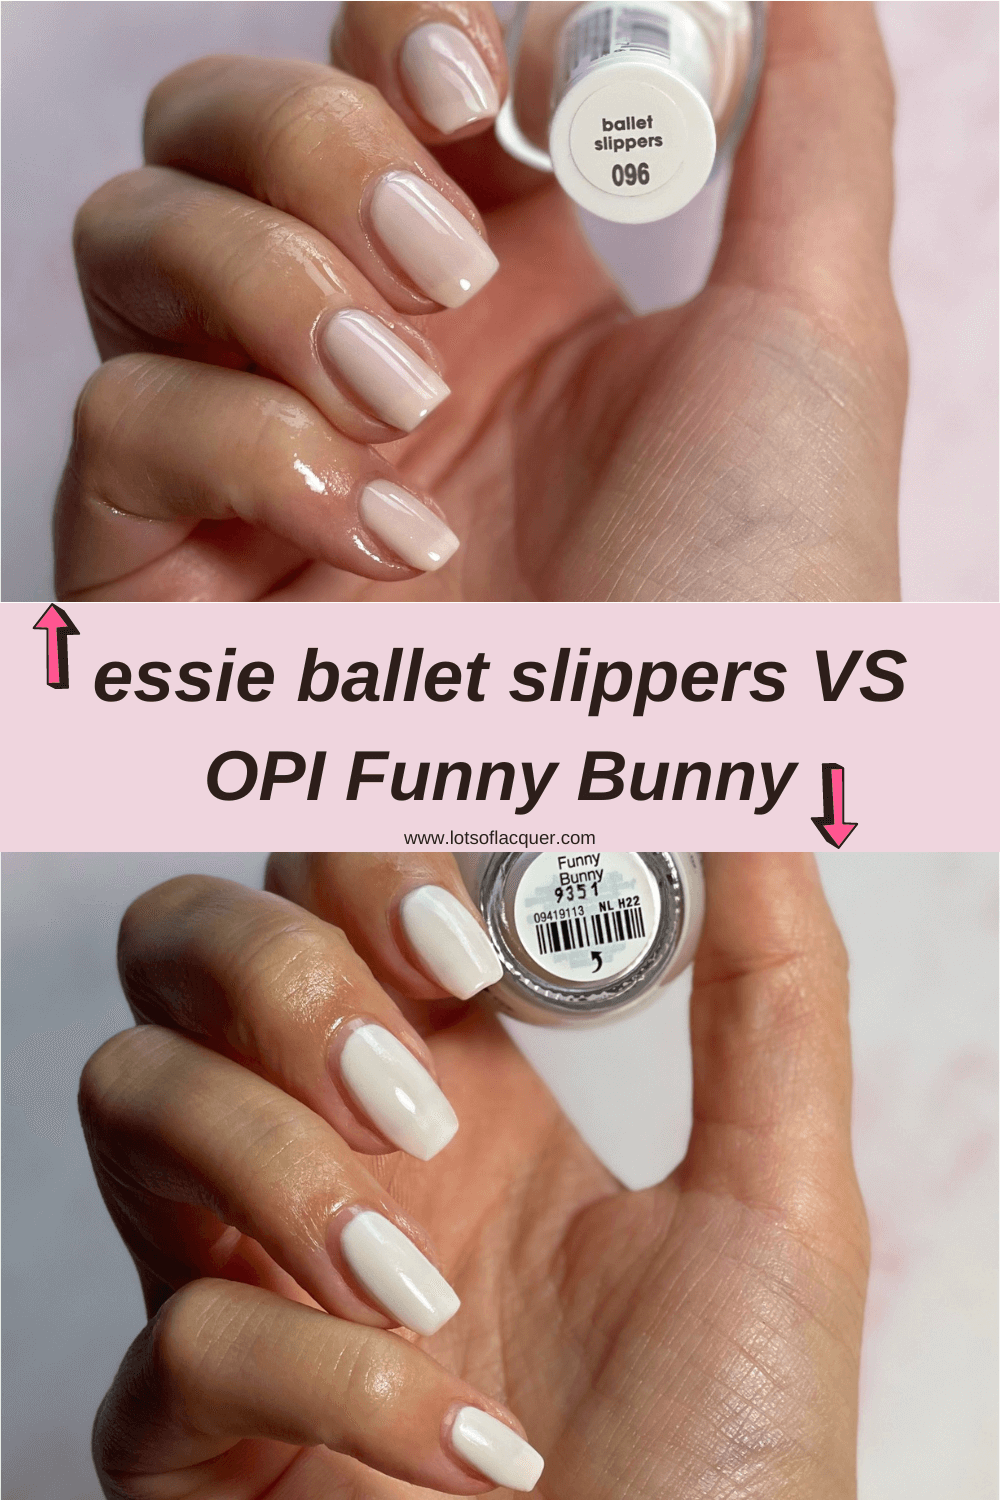 Amazon.com : Essie Nail Polish Natural Mani Kit, Ballet Slippers, Sheer  Pink Nail Polish + Essie All-In-One Base Coat +Top Coat + Strengthener,  Gifts For Women And Men, 0.46 Fl Oz Each :